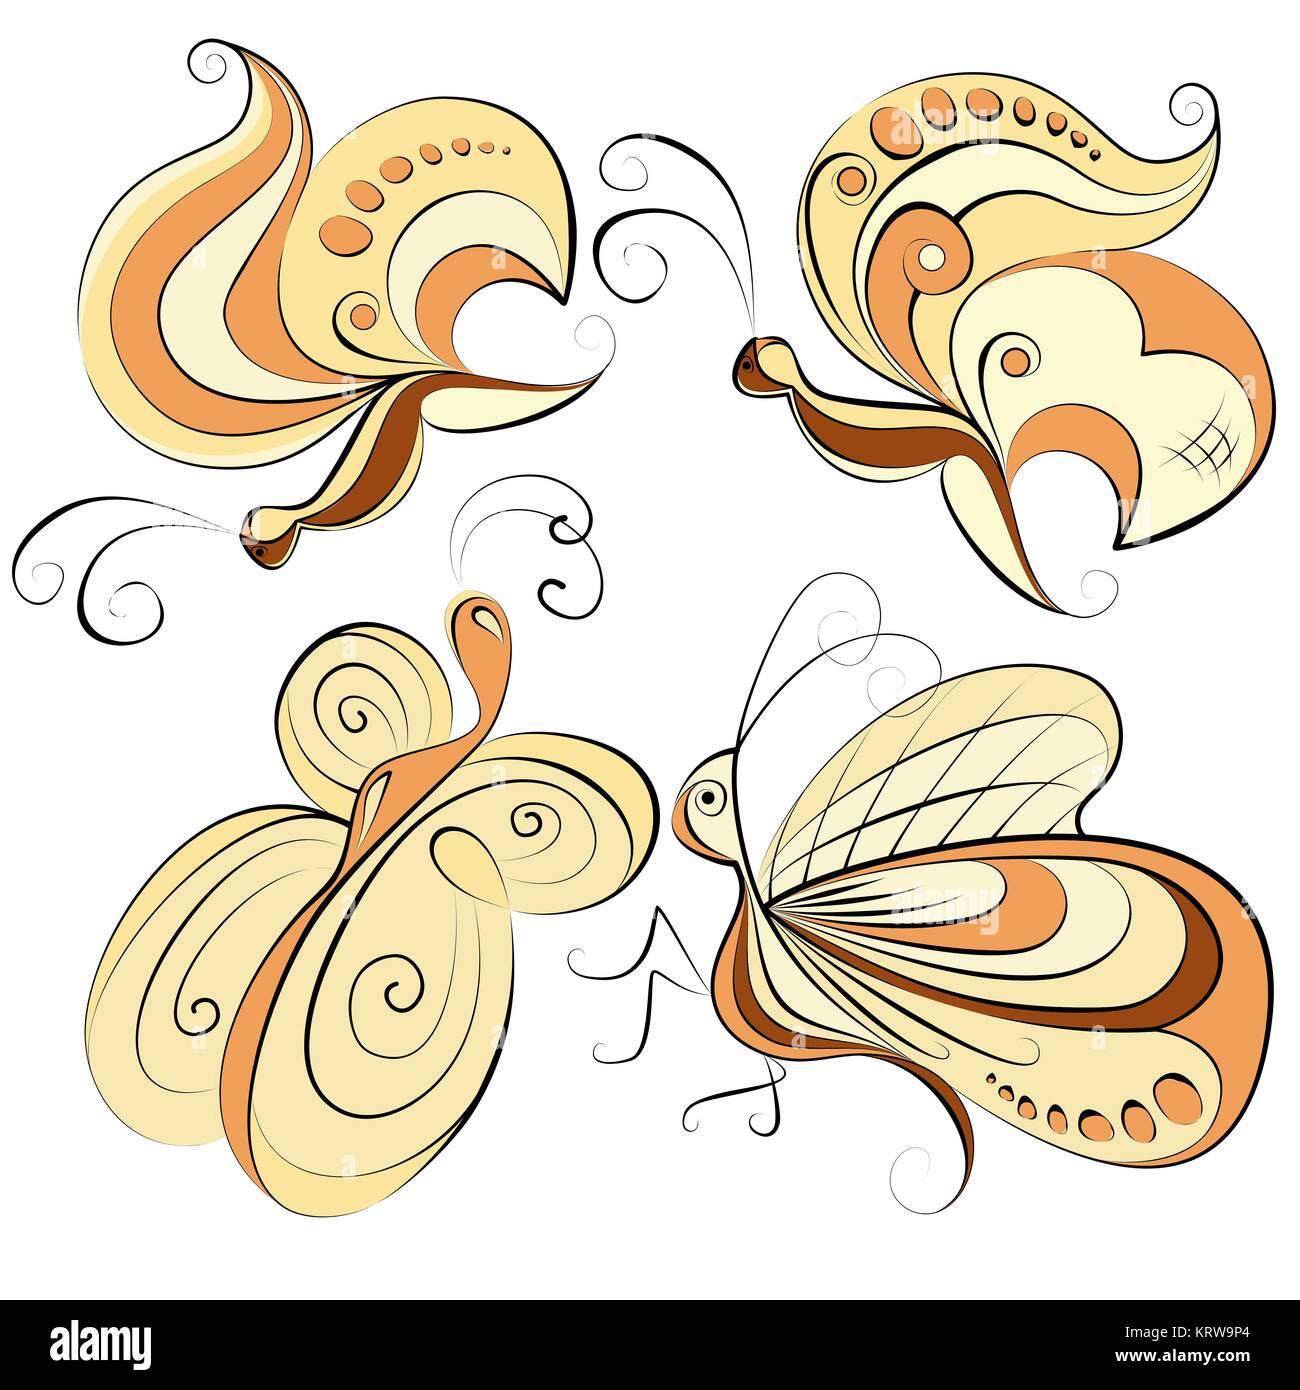 Illustration - four different butterflies on a white background Stock Photo